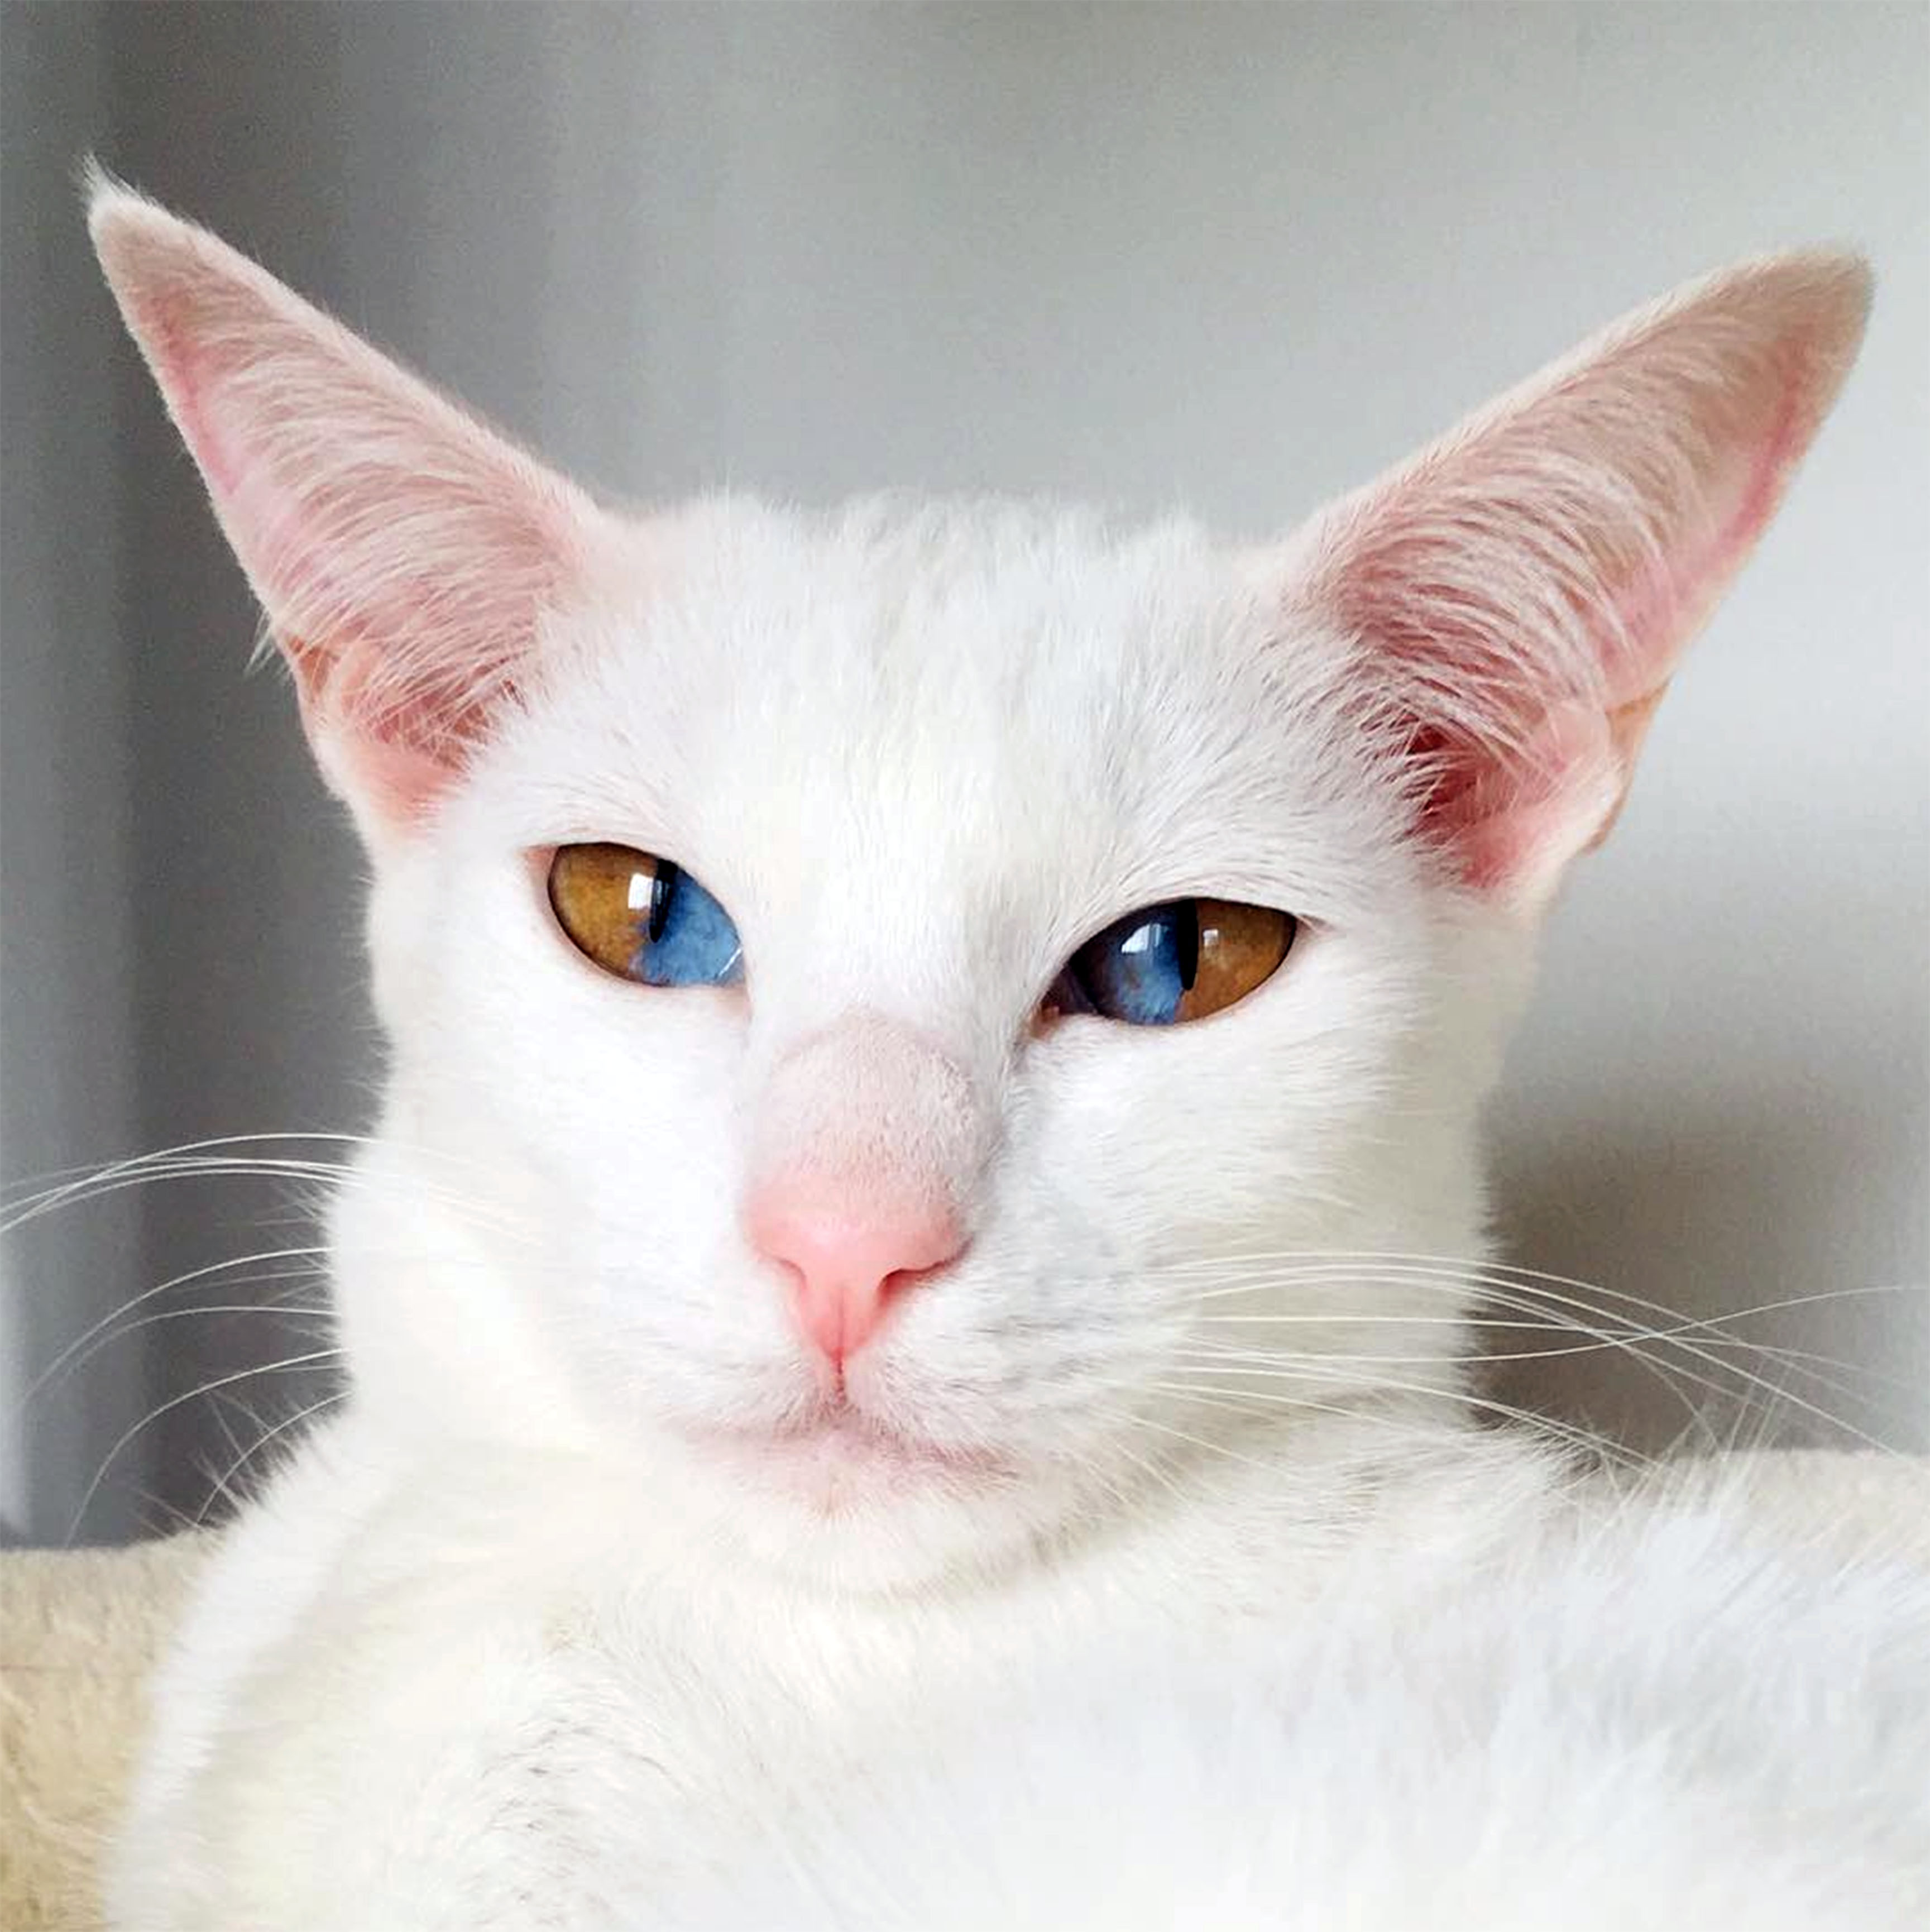 Meet This Stunning White Cat With Rare Condition That Has